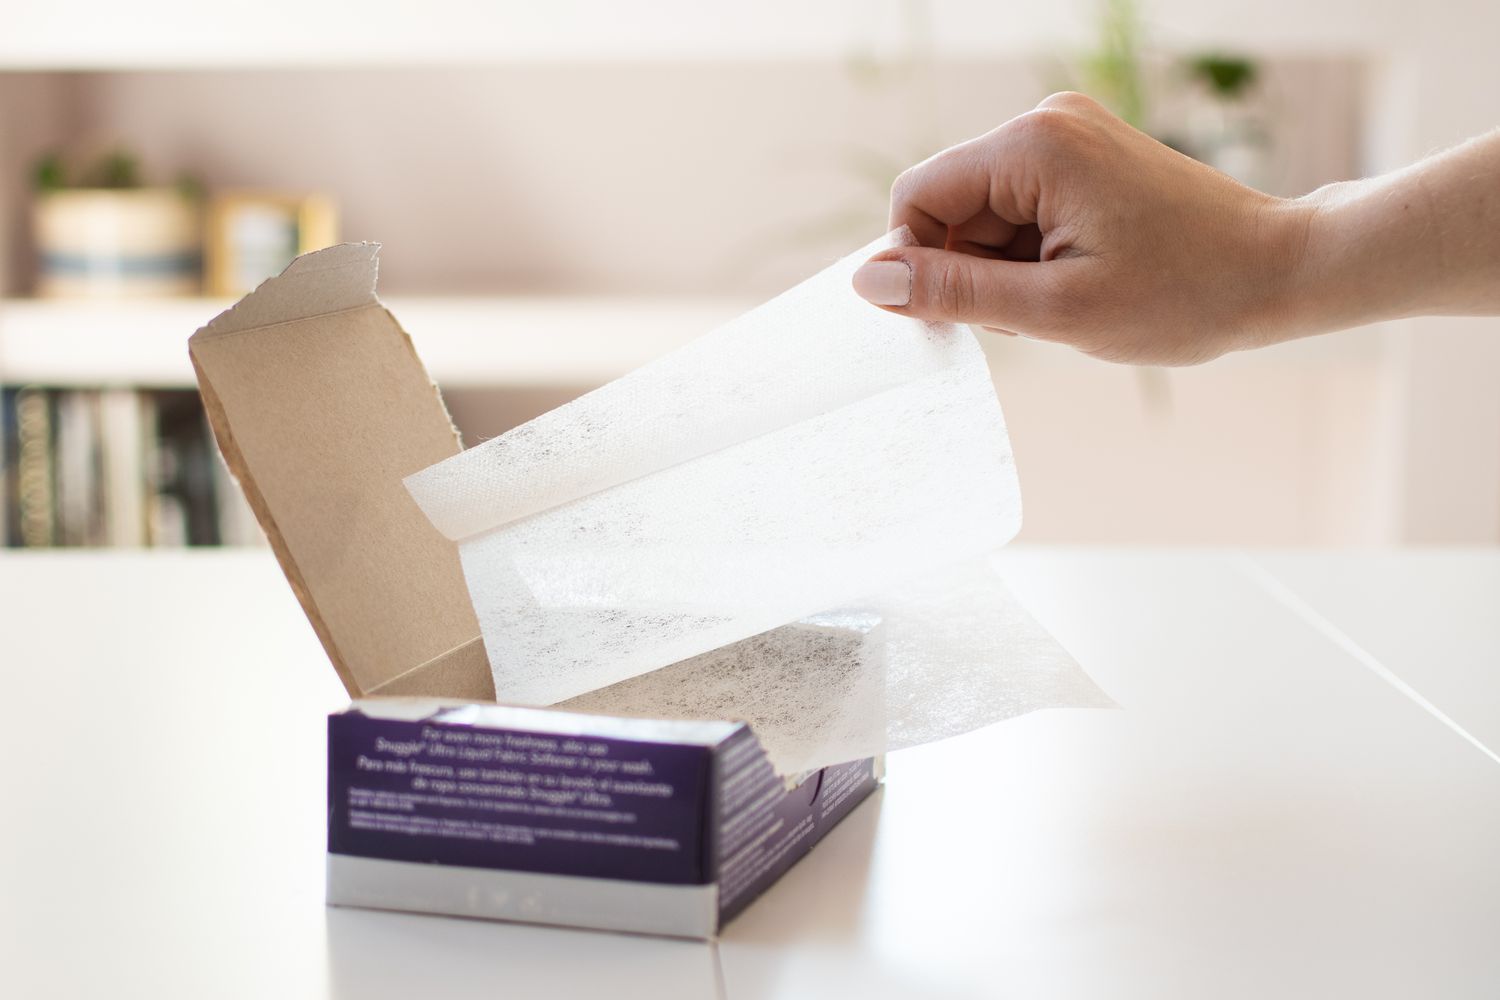 Dryer sheets being pulled from box